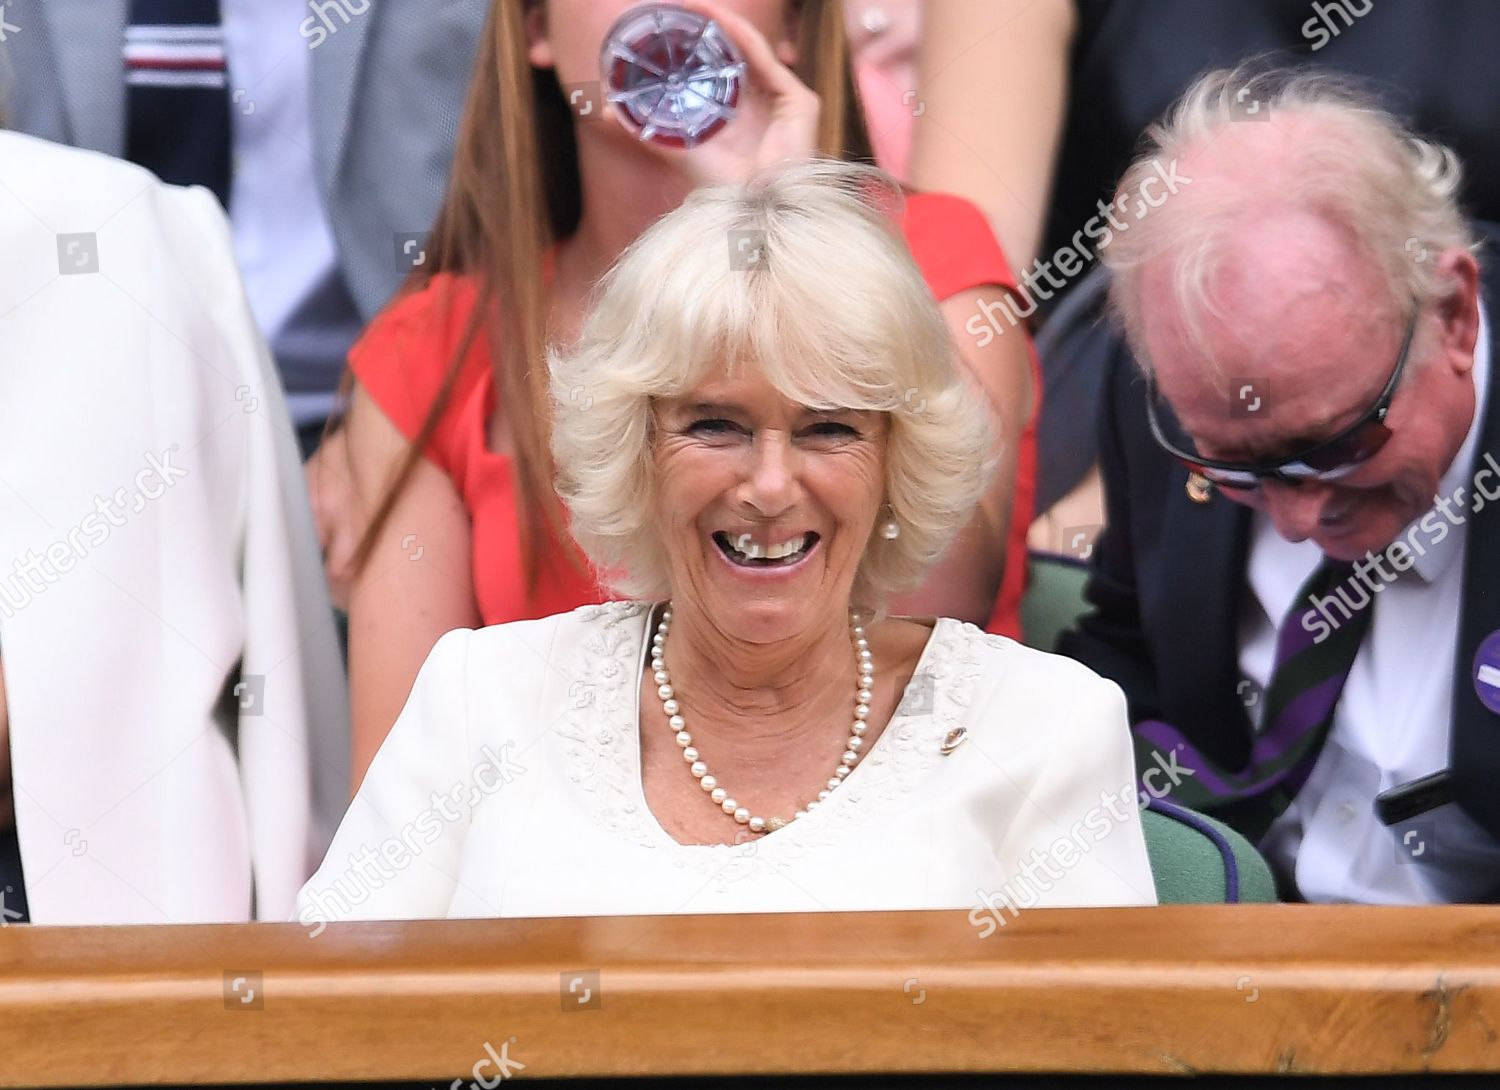 wimbledon-tennis-championships-day-9-the-all-england-lawn-tennis-and-croquet-club-london-uk-shutterstock-editorial-10331427bc.jpg